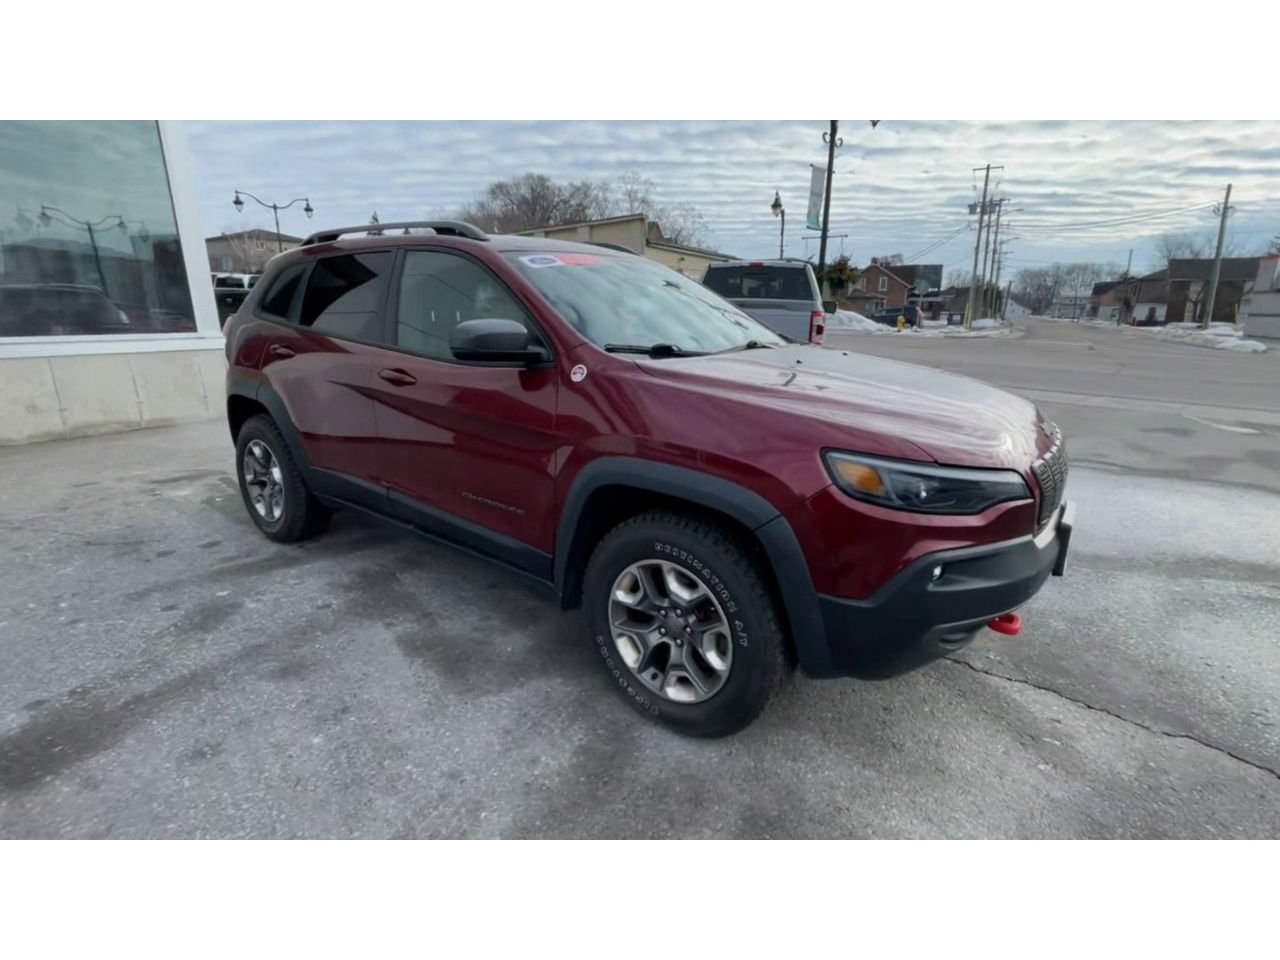 2019 Jeep Cherokee Trailhawk - P21291 Mobile Image 1